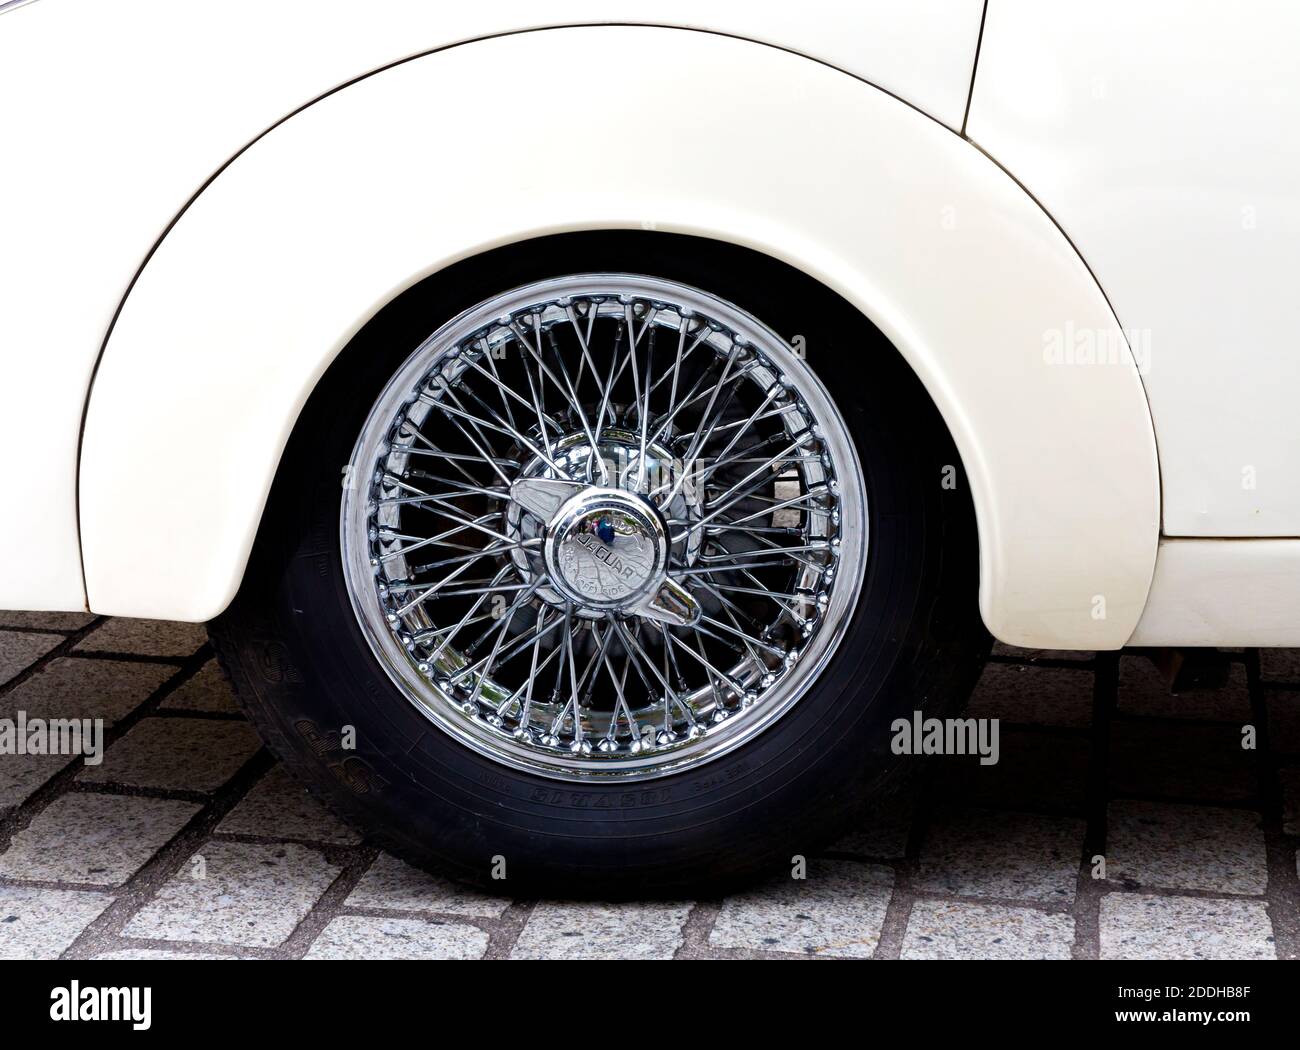 Detail of rear wheel on and spokes on Jaguar Mark 2 3.4 Litre a mid sized luxury sports saloon car produced in Coventry England from 1959 until 1967. Stock Photo